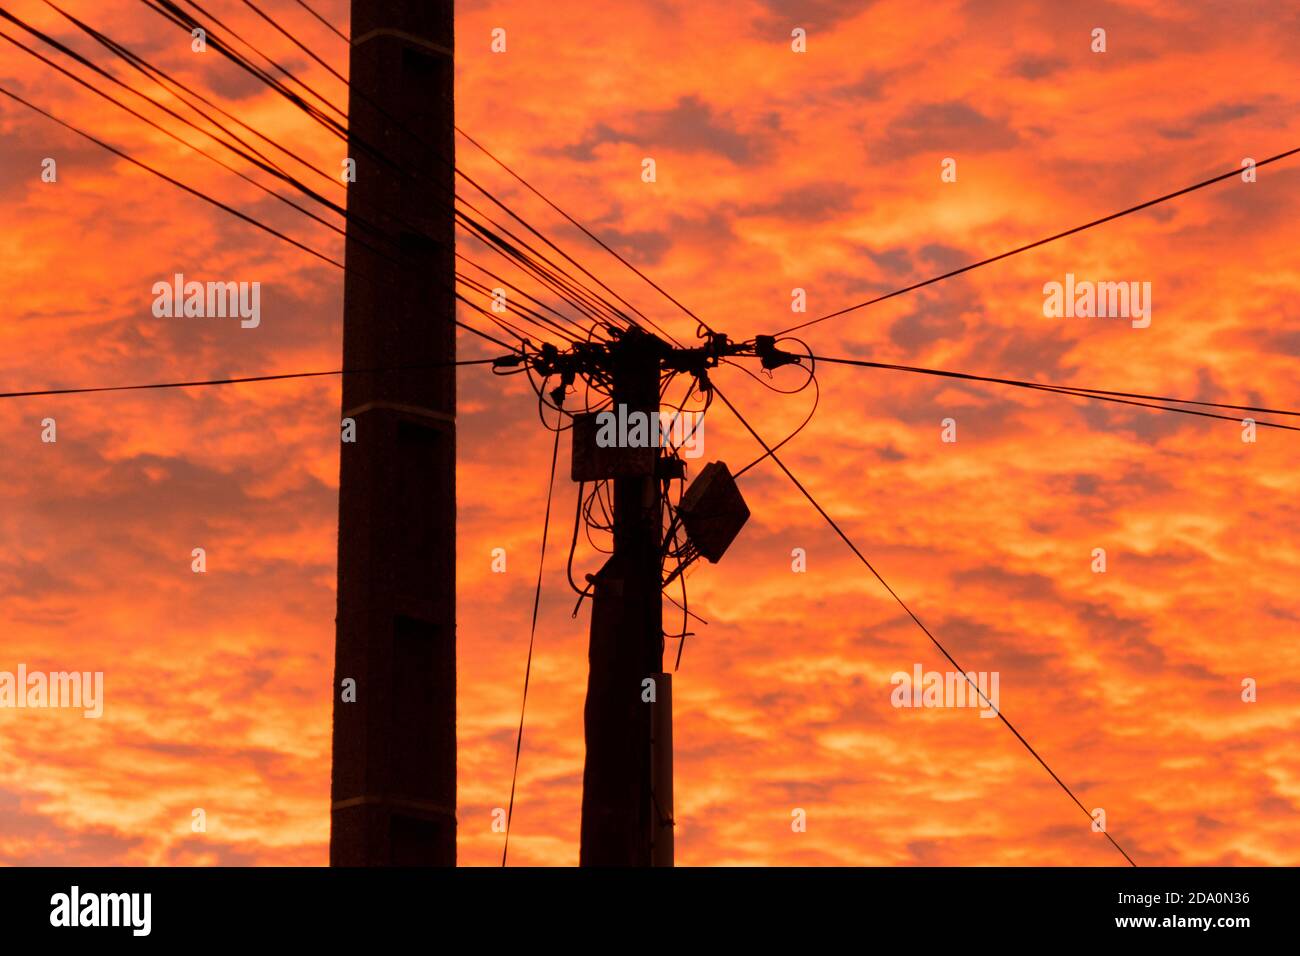 An electrical line and a power pole Stock Photo